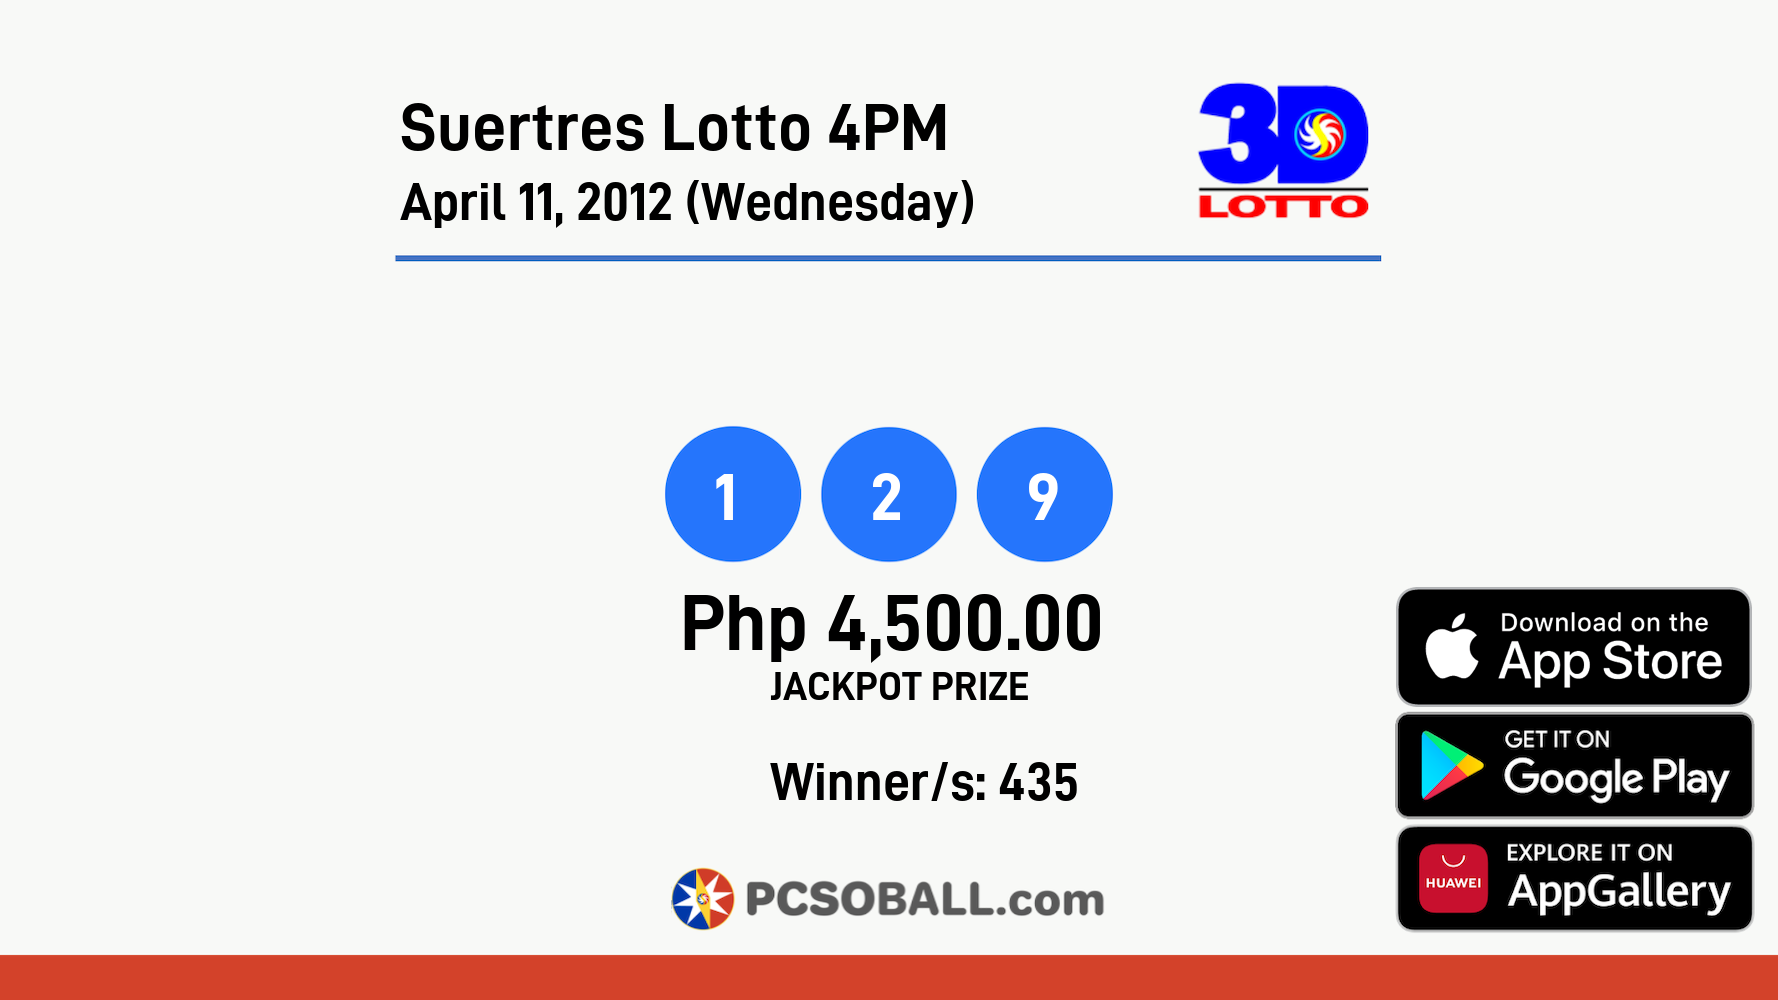 Suertres Lotto 4PM April 11, 2012 (Wednesday) Result